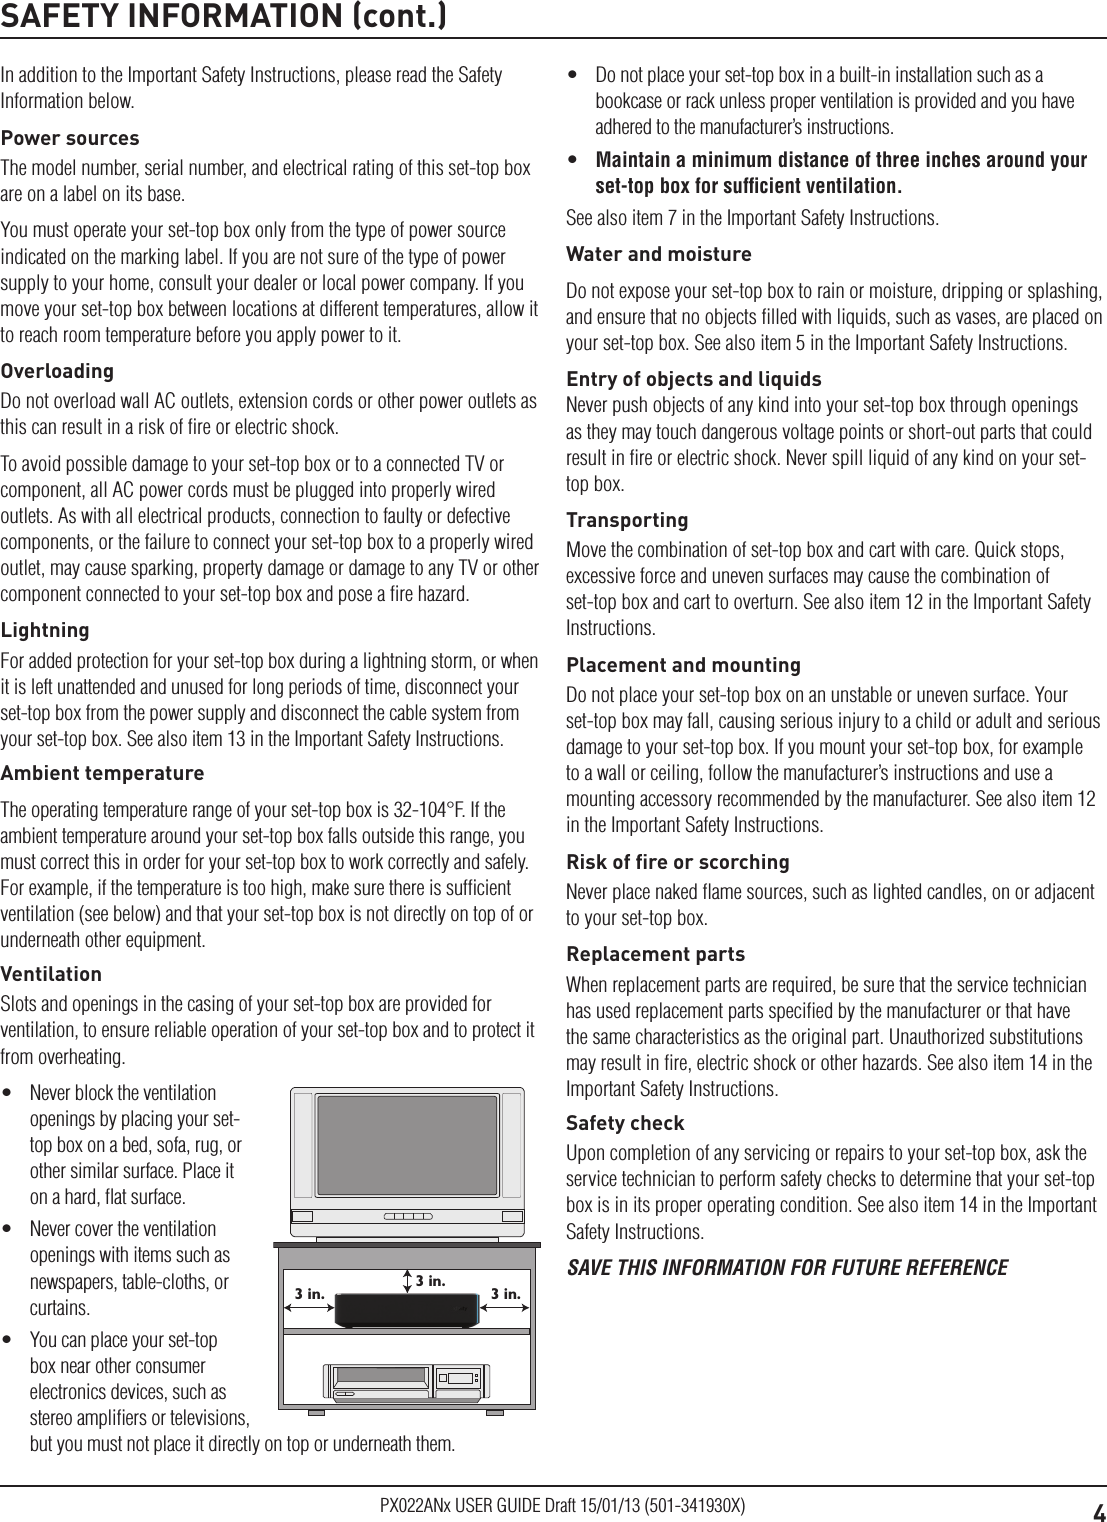 4PX022ANx USER GUIDE Draft 15/01/13 (501-341930X)SAFETY INFORMATION (cont.)In addition to the Important Safety Instructions, please read the Safety Information below.Power sourcesThe model number, serial number, and electrical rating of this set-top box are on a label on its base.You must operate your set-top box only from the type of power source indicated on the marking label. If you are not sure of the type of power supply to your home, consult your dealer or local power company. If you move your set-top box between locations at different temperatures, allow it to reach room temperature before you apply power to it.OverloadingDo not overload wall AC outlets, extension cords or other power outlets as this can result in a risk of ﬁre or electric shock.To avoid possible damage to your set-top box or to a connected TV or component, all AC power cords must be plugged into properly wired outlets. As with all electrical products, connection to faulty or defective components, or the failure to connect your set-top box to a properly wired outlet, may cause sparking, property damage or damage to any TV or other component connected to your set-top box and pose a ﬁre hazard.LightningFor added protection for your set-top box during a lightning storm, or when it is left unattended and unused for long periods of time, disconnect your set-top box from the power supply and disconnect the cable system from your set-top box. See also item 13 in the Important Safety Instructions.Ambient temperatureThe operating temperature range of your set-top box is 32-104°F. If the ambient temperature around your set-top box falls outside this range, you must correct this in order for your set-top box to work correctly and safely. For example, if the temperature is too high, make sure there is sufﬁcient ventilation (see below) and that your set-top box is not directly on top of or underneath other equipment.VentilationSlots and openings in the casing of your set-top box are provided for ventilation, to ensure reliable operation of your set-top box and to protect it from overheating.•  Never block the ventilation openings by placing your set-top box on a bed, sofa, rug, or other similar surface. Place it on a hard, ﬂat surface.•  Never cover the ventilation openings with items such as newspapers, table-cloths, or curtains.•  You can place your set-top box near other consumer electronics devices, such as stereo ampliﬁers or televisions, but you must not place it directly on top or underneath them.3 in.3 in.3 in.•  Do not place your set-top box in a built-in installation such as a bookcase or rack unless proper ventilation is provided and you have adhered to the manufacturer’s instructions.•  Maintain a minimum distance of three inches around your set-top box for sufﬁcient ventilation.See also item 7 in the Important Safety Instructions.Water and moistureDo not expose your set-top box to rain or moisture, dripping or splashing, and ensure that no objects ﬁlled with liquids, such as vases, are placed on your set-top box. See also item 5 in the Important Safety Instructions.Entry of objects and liquidsNever push objects of any kind into your set-top box through openings as they may touch dangerous voltage points or short-out parts that could result in ﬁre or electric shock. Never spill liquid of any kind on your set-top box.TransportingMove the combination of set-top box and cart with care. Quick stops, excessive force and uneven surfaces may cause the combination of set-top box and cart to overturn. See also item 12 in the Important Safety Instructions.Placement and mountingDo not place your set-top box on an unstable or uneven surface. Your set-top box may fall, causing serious injury to a child or adult and serious damage to your set-top box. If you mount your set-top box, for example to a wall or ceiling, follow the manufacturer’s instructions and use a mounting accessory recommended by the manufacturer. See also item 12 in the Important Safety Instructions.Risk of ﬁre or scorchingNever place naked ﬂame sources, such as lighted candles, on or adjacent to your set-top box.Replacement partsWhen replacement parts are required, be sure that the service technician has used replacement parts speciﬁed by the manufacturer or that have the same characteristics as the original part. Unauthorized substitutions may result in ﬁre, electric shock or other hazards. See also item 14 in the Important Safety Instructions.Safety checkUpon completion of any servicing or repairs to your set-top box, ask the service technician to perform safety checks to determine that your set-top box is in its proper operating condition. See also item 14 in the Important Safety Instructions.SAVE THIS INFORMATION FOR FUTURE REFERENCE